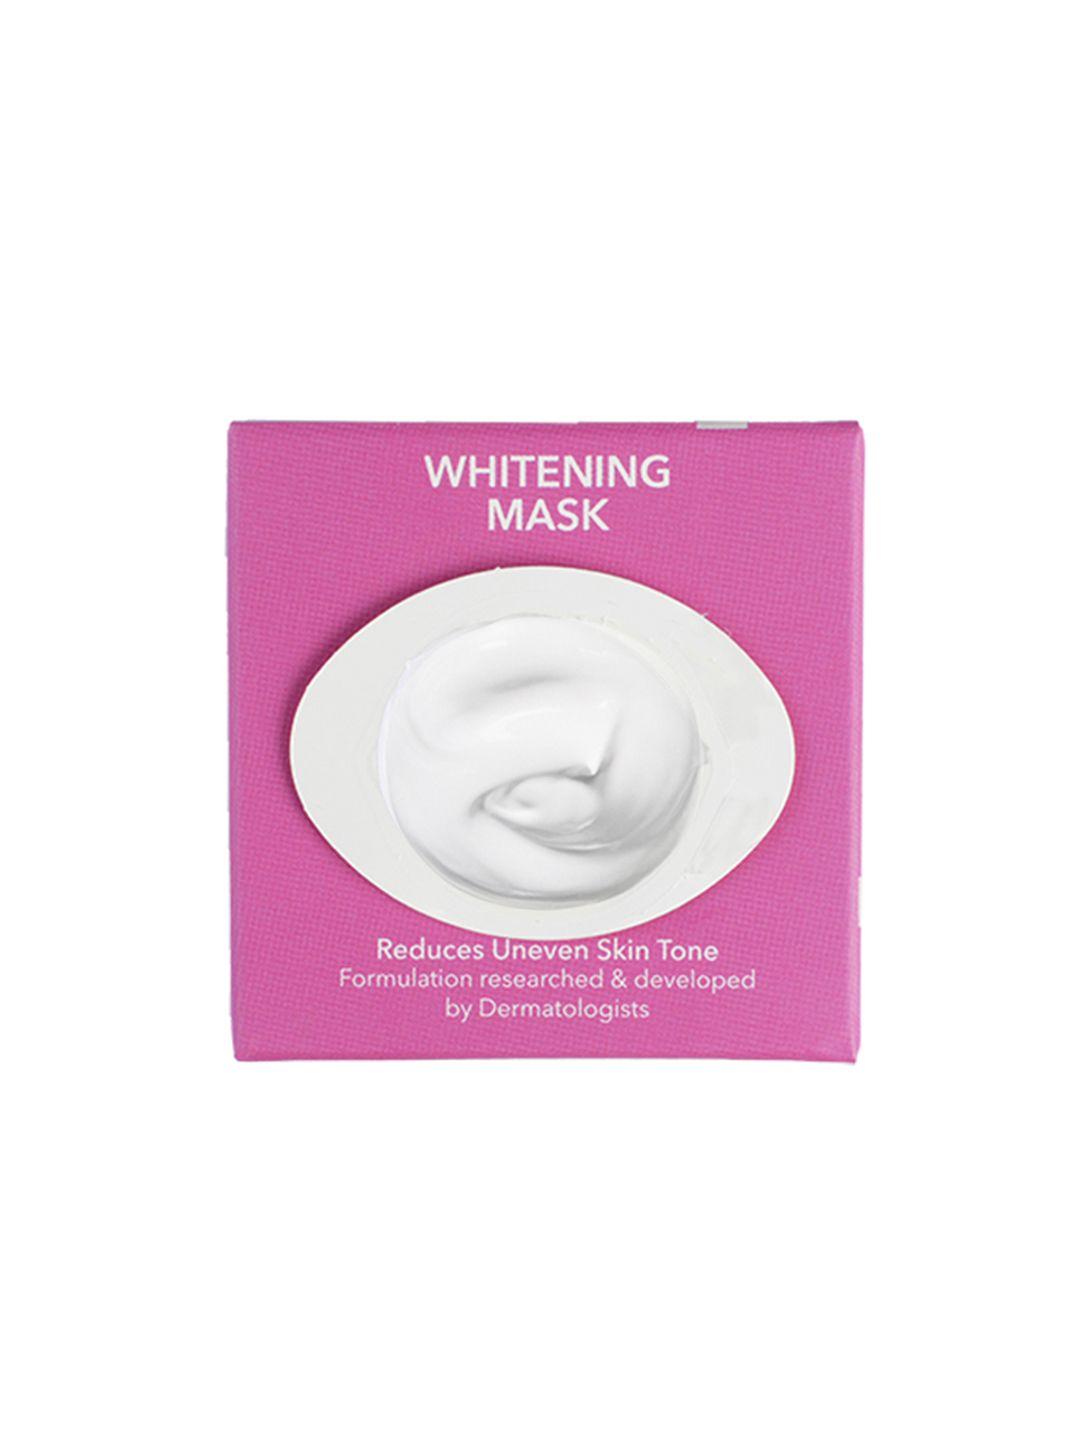 o3 + whitening mask to reduce uneven skin tone - 5 g